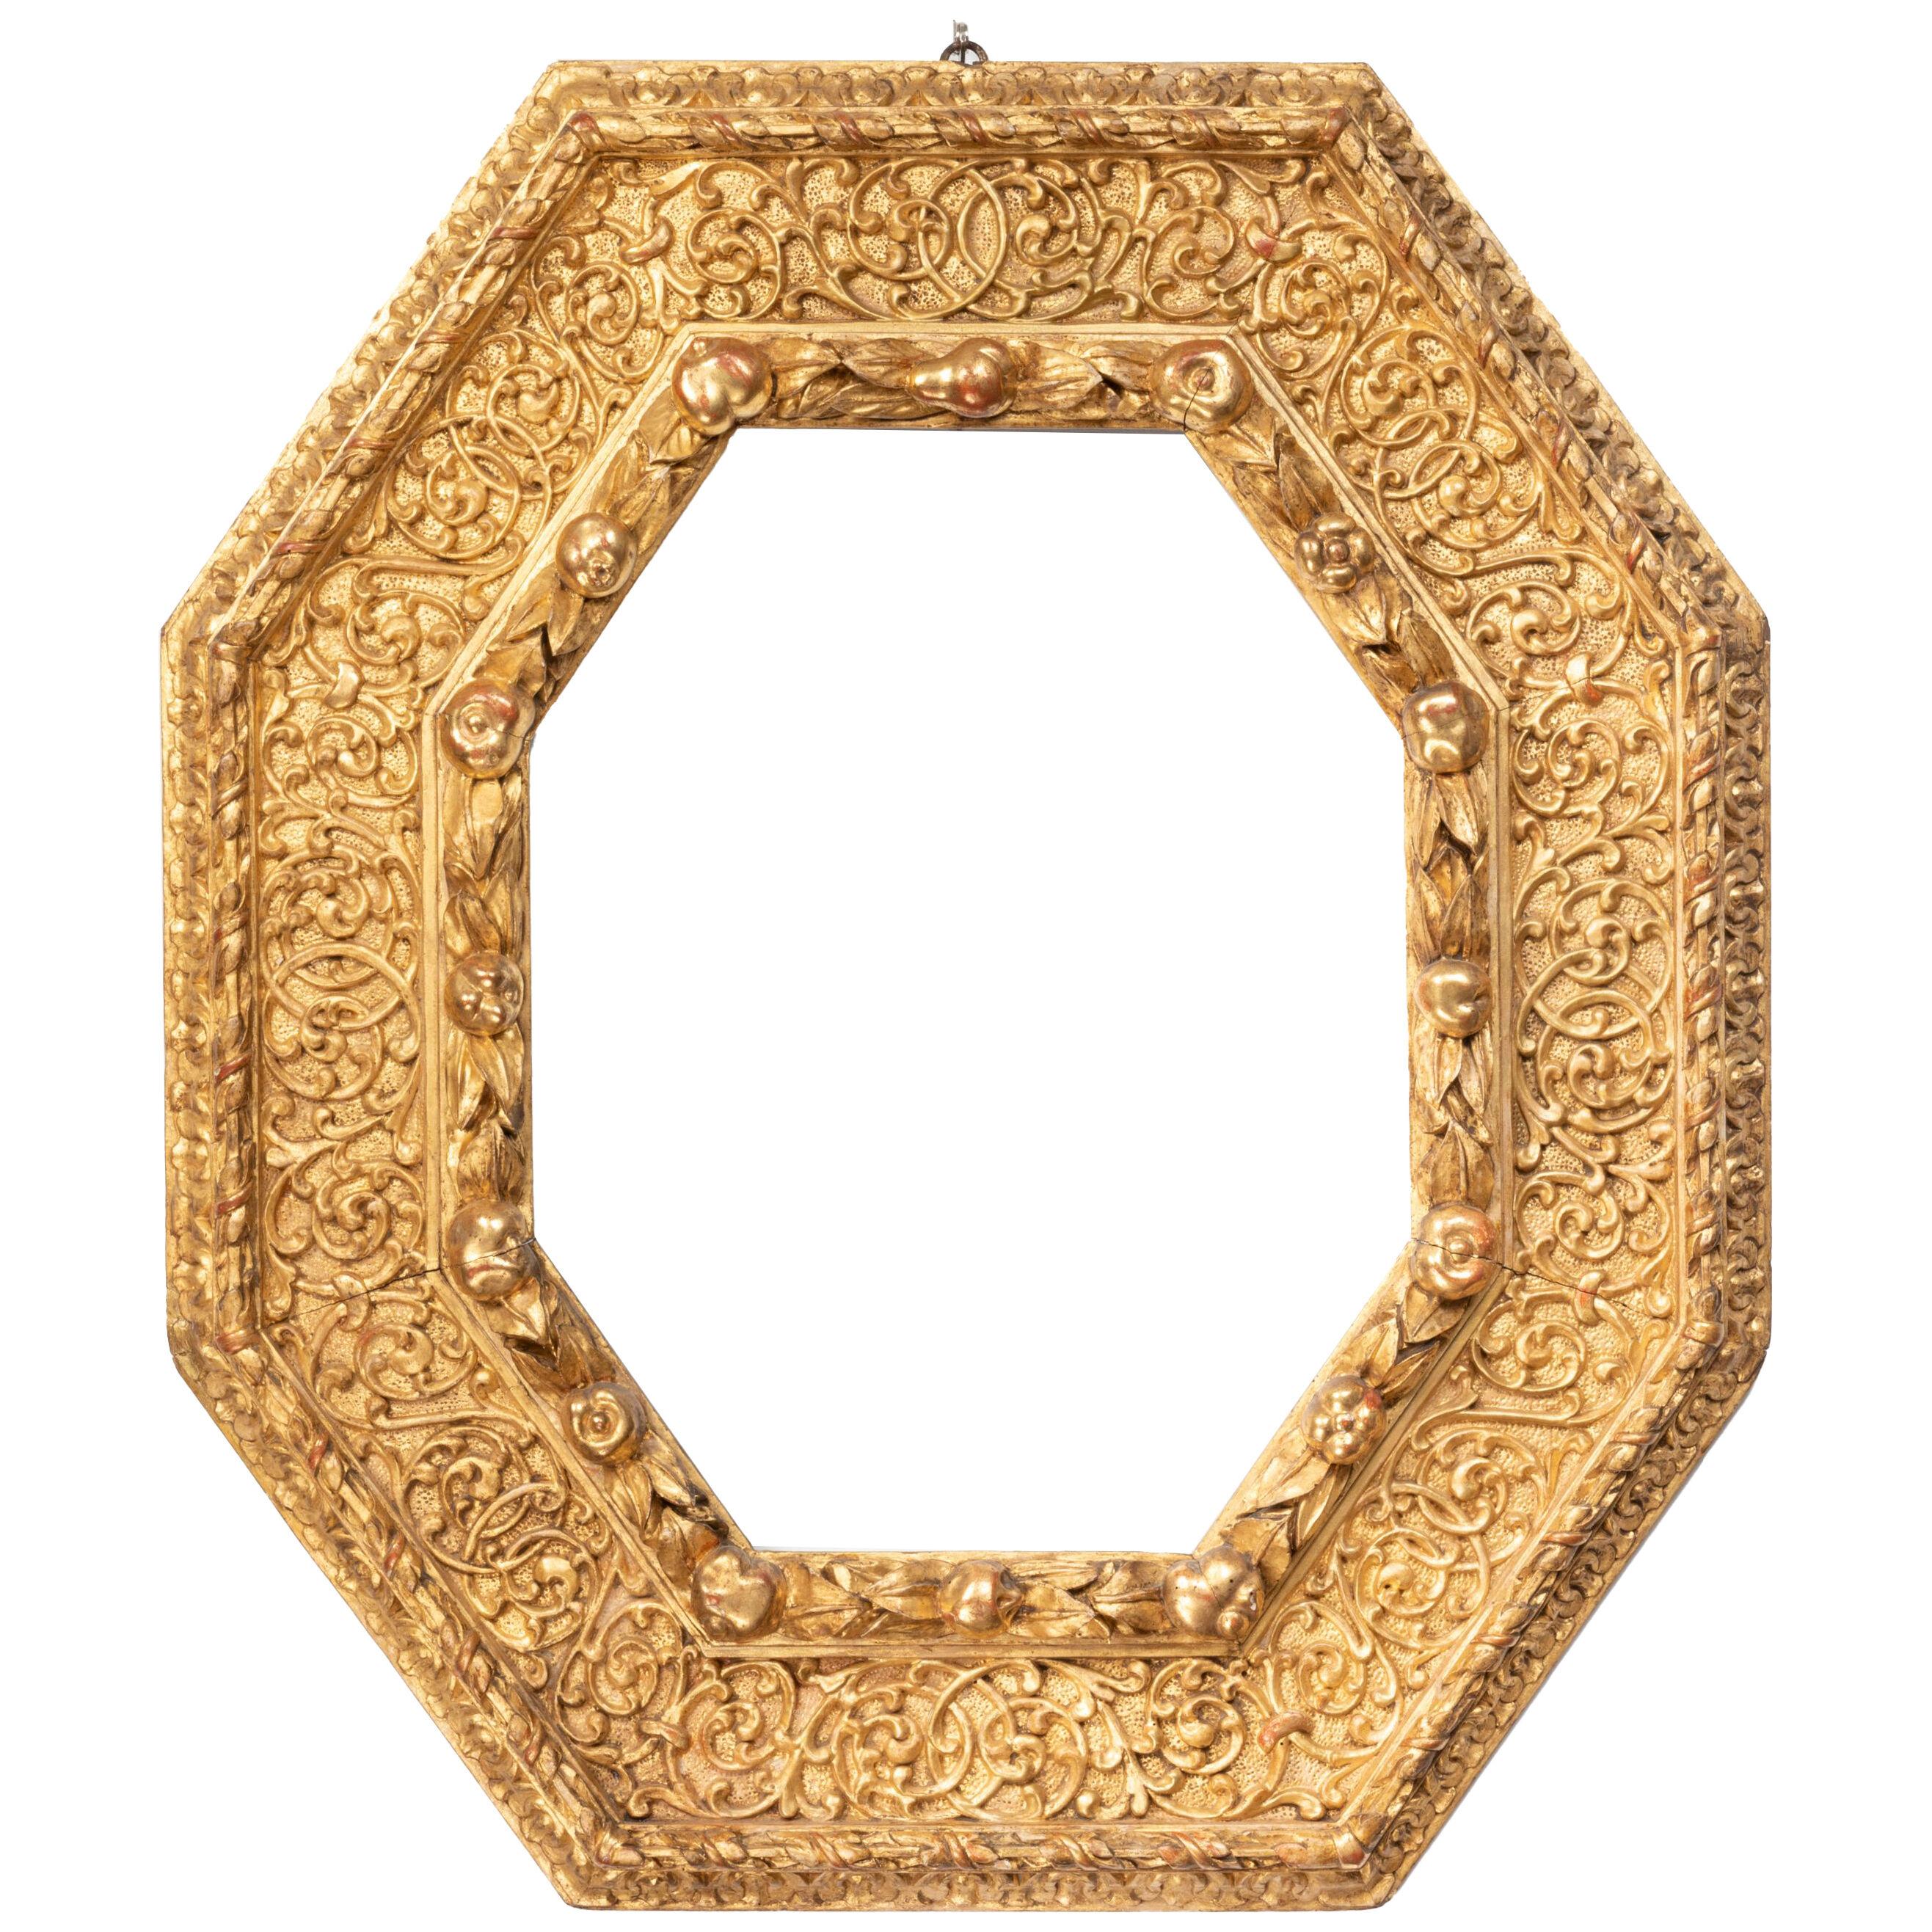 Octagonal gilded wooden frame - Italy, Piedmont - Late 16th century